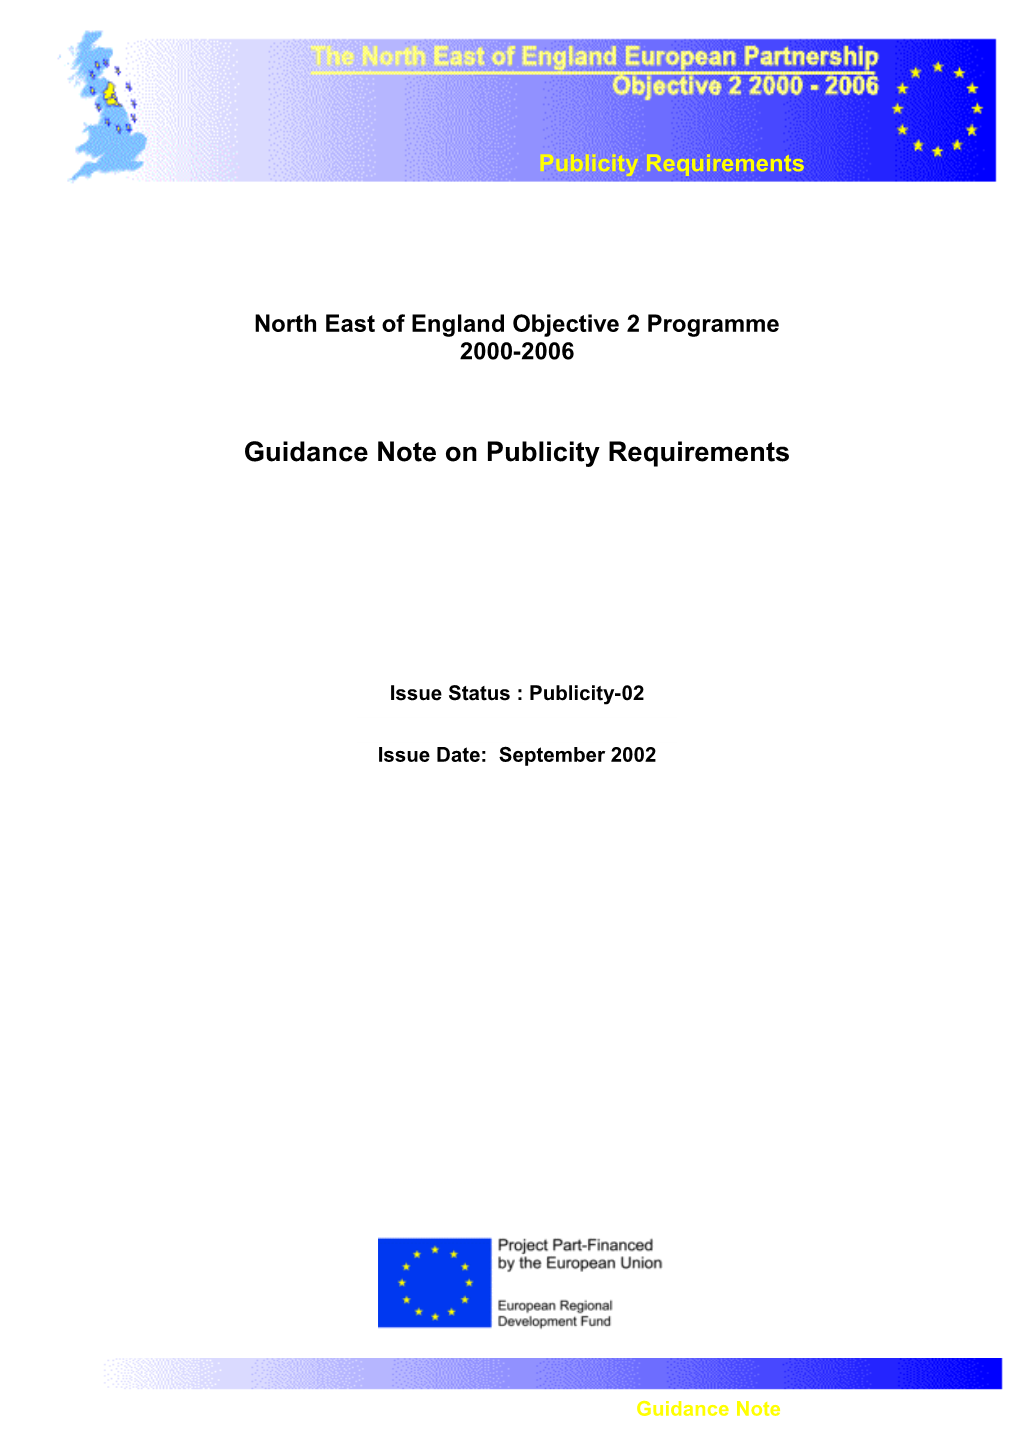 North East of England Objective 2 Programme 2000-2006